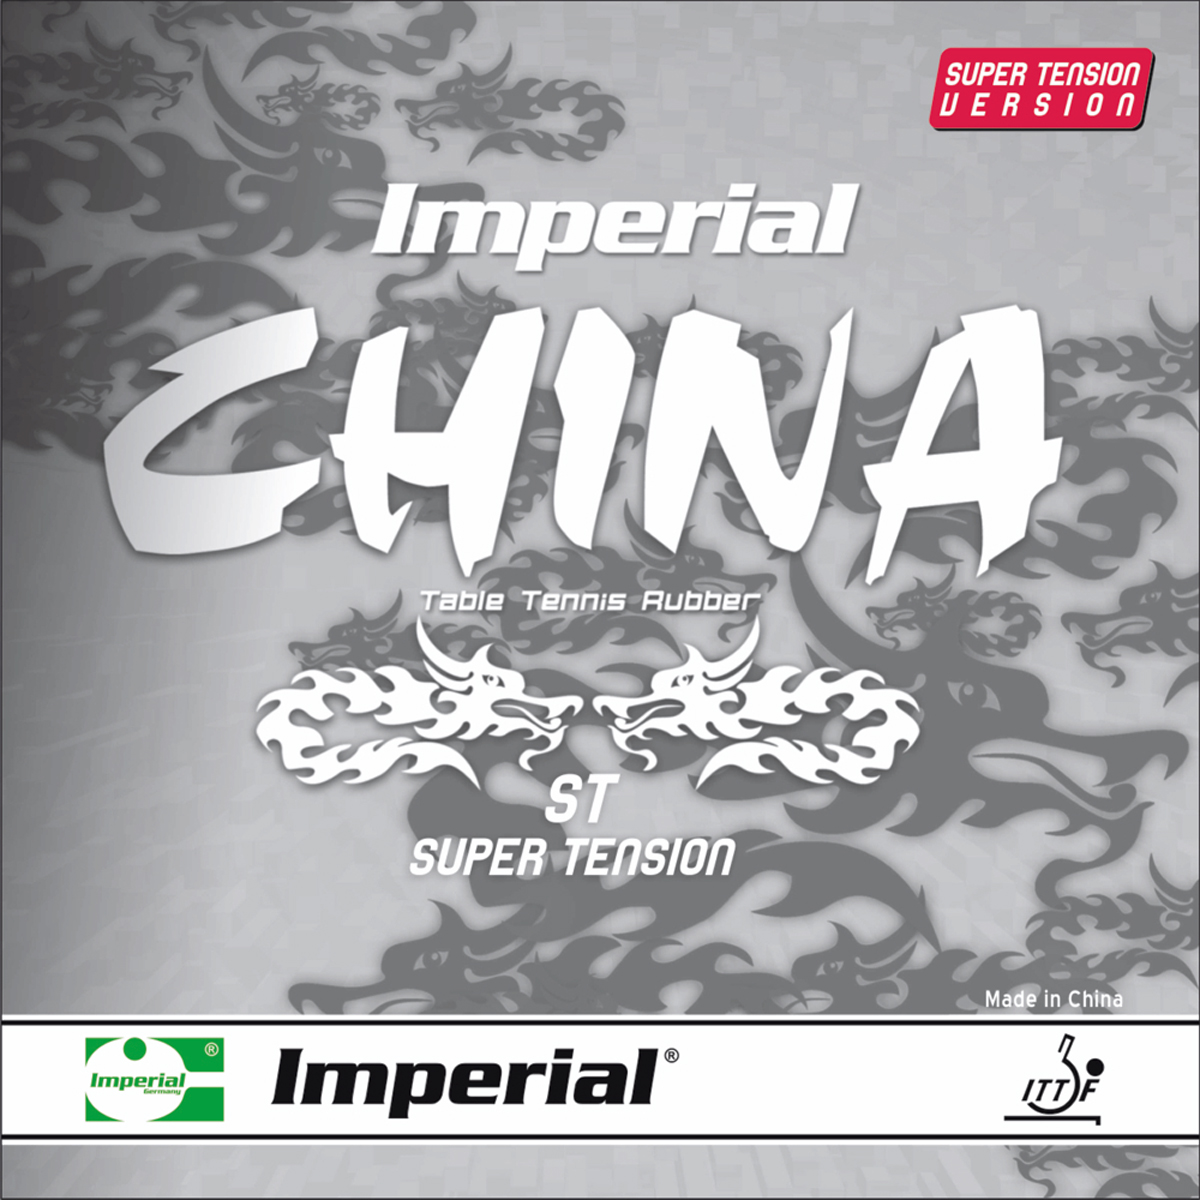 Imperial Belag China ST Super Tension